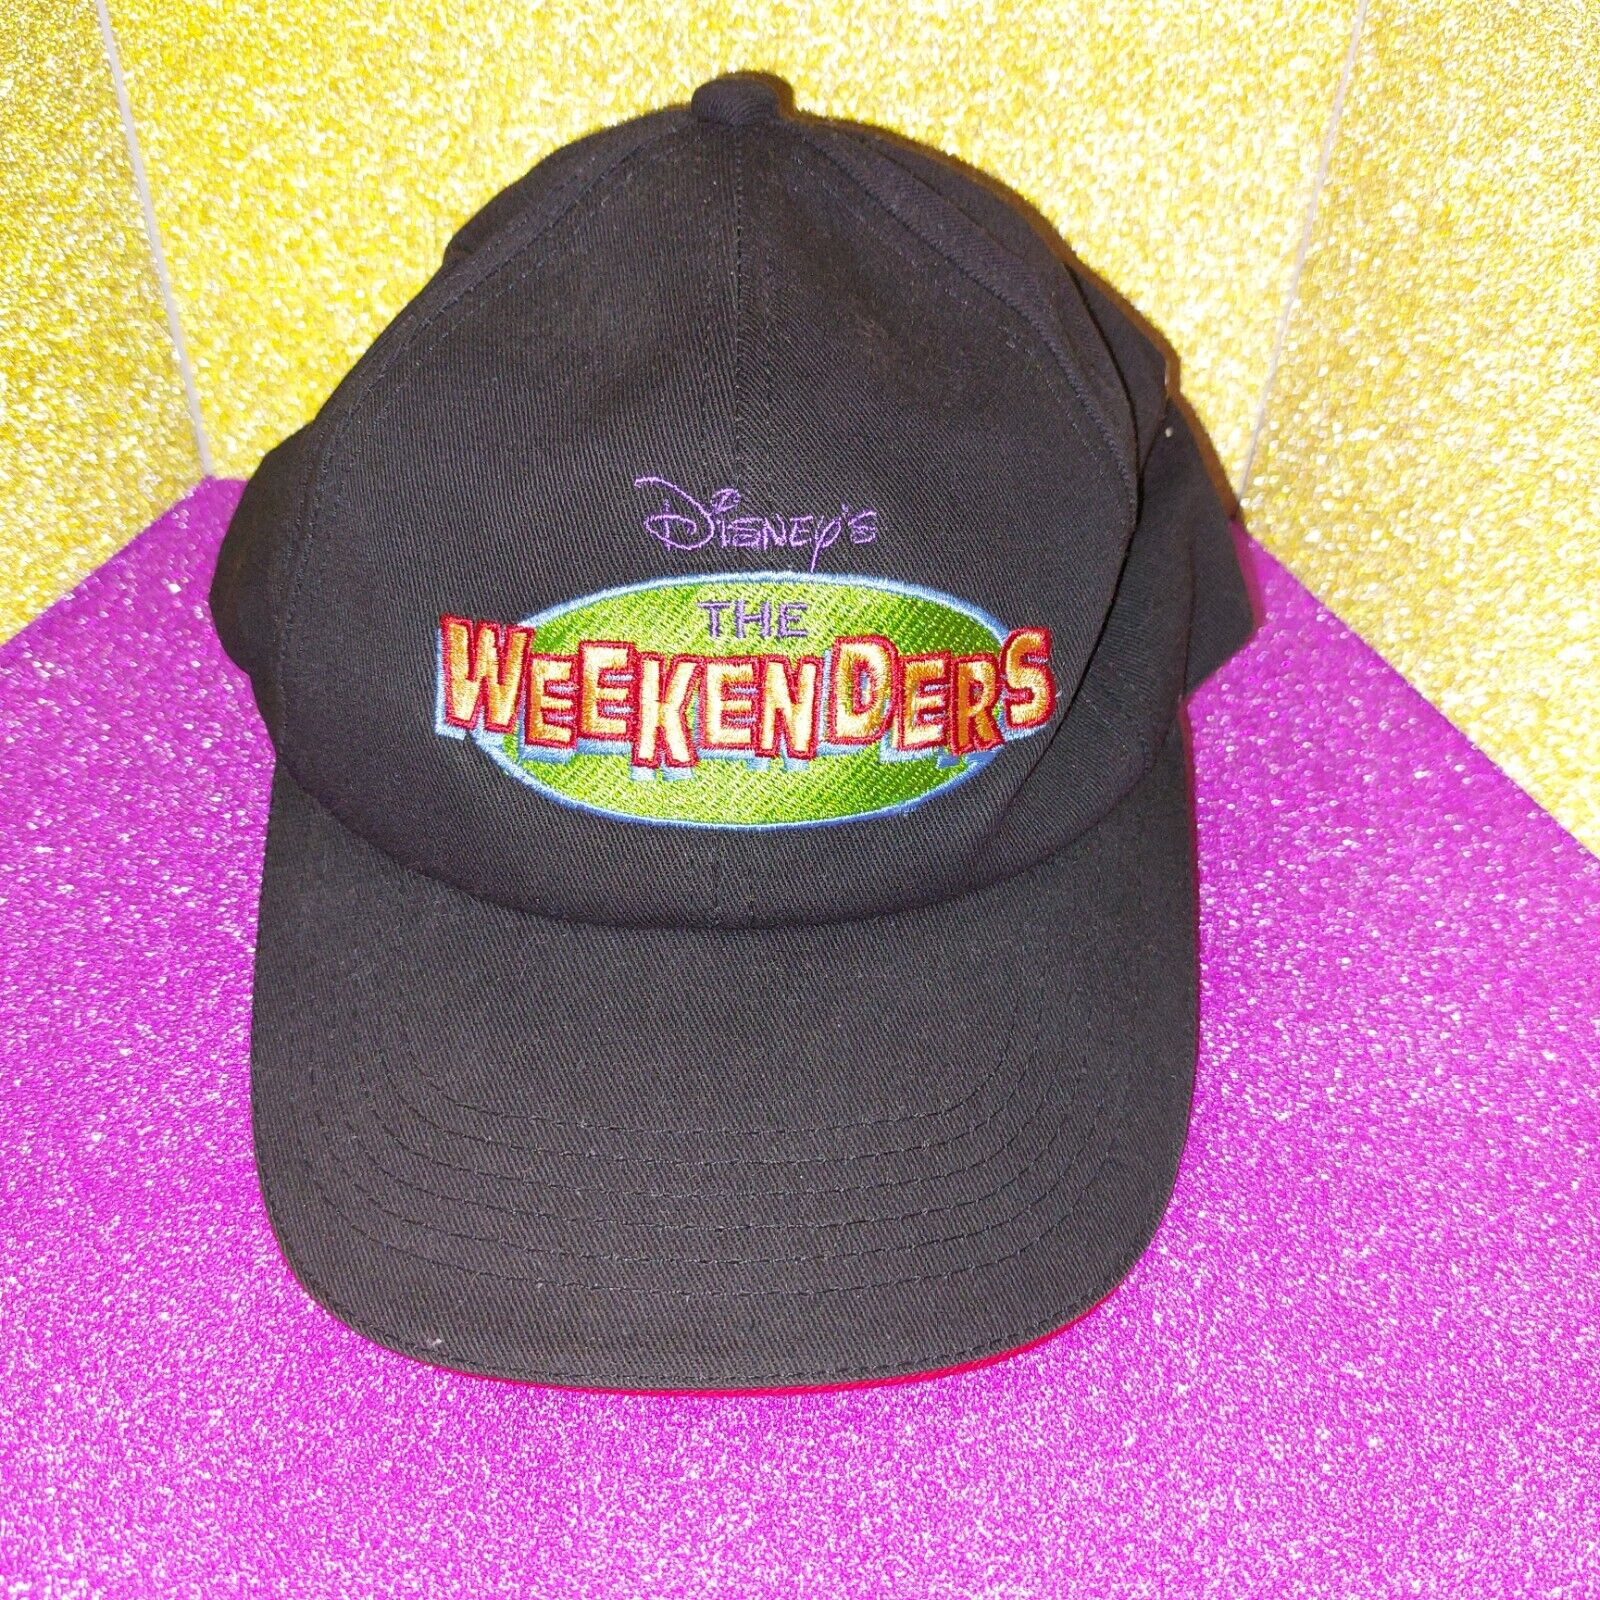 The Weekenders Baseball Cap Hat Disney Channel Black Adjustable Embroidered Tino